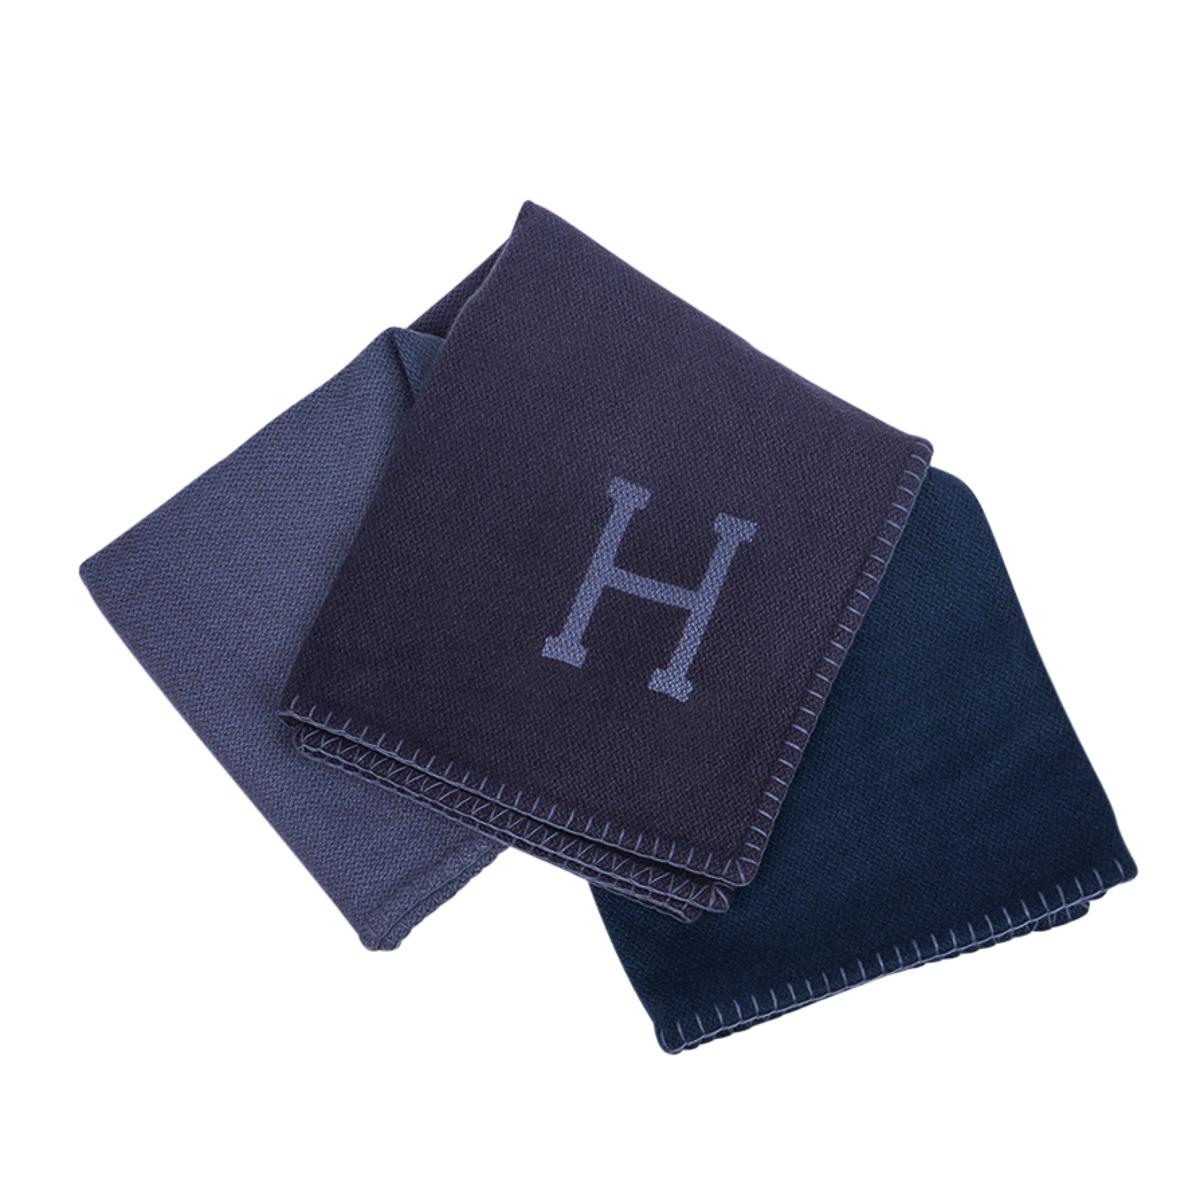 Mightychic offers an Hermes Yack 'n' Dye Bed Cover blanket featured in Anthracite.
Soft hand spun Tibetan Yak blanket created with a soft Ombre finish from Dark Grey to a deep Green.
Each edge is placed in a different dye to create this subtle